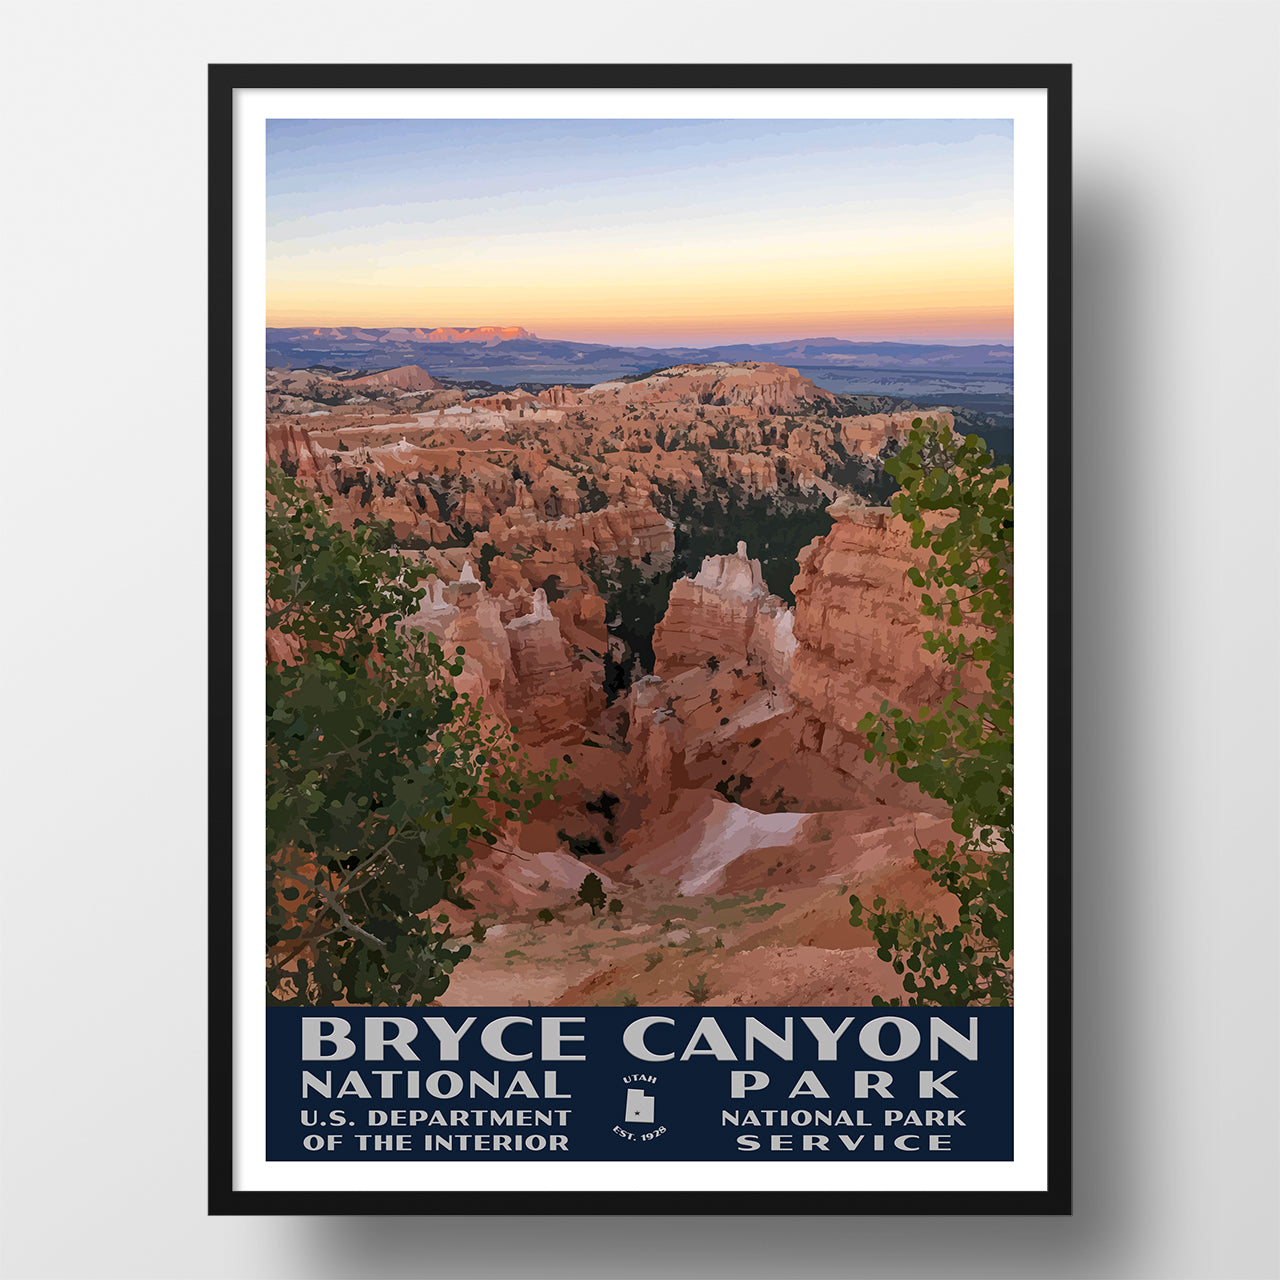 Bryce Canyon National Park poster wpa style sunset point